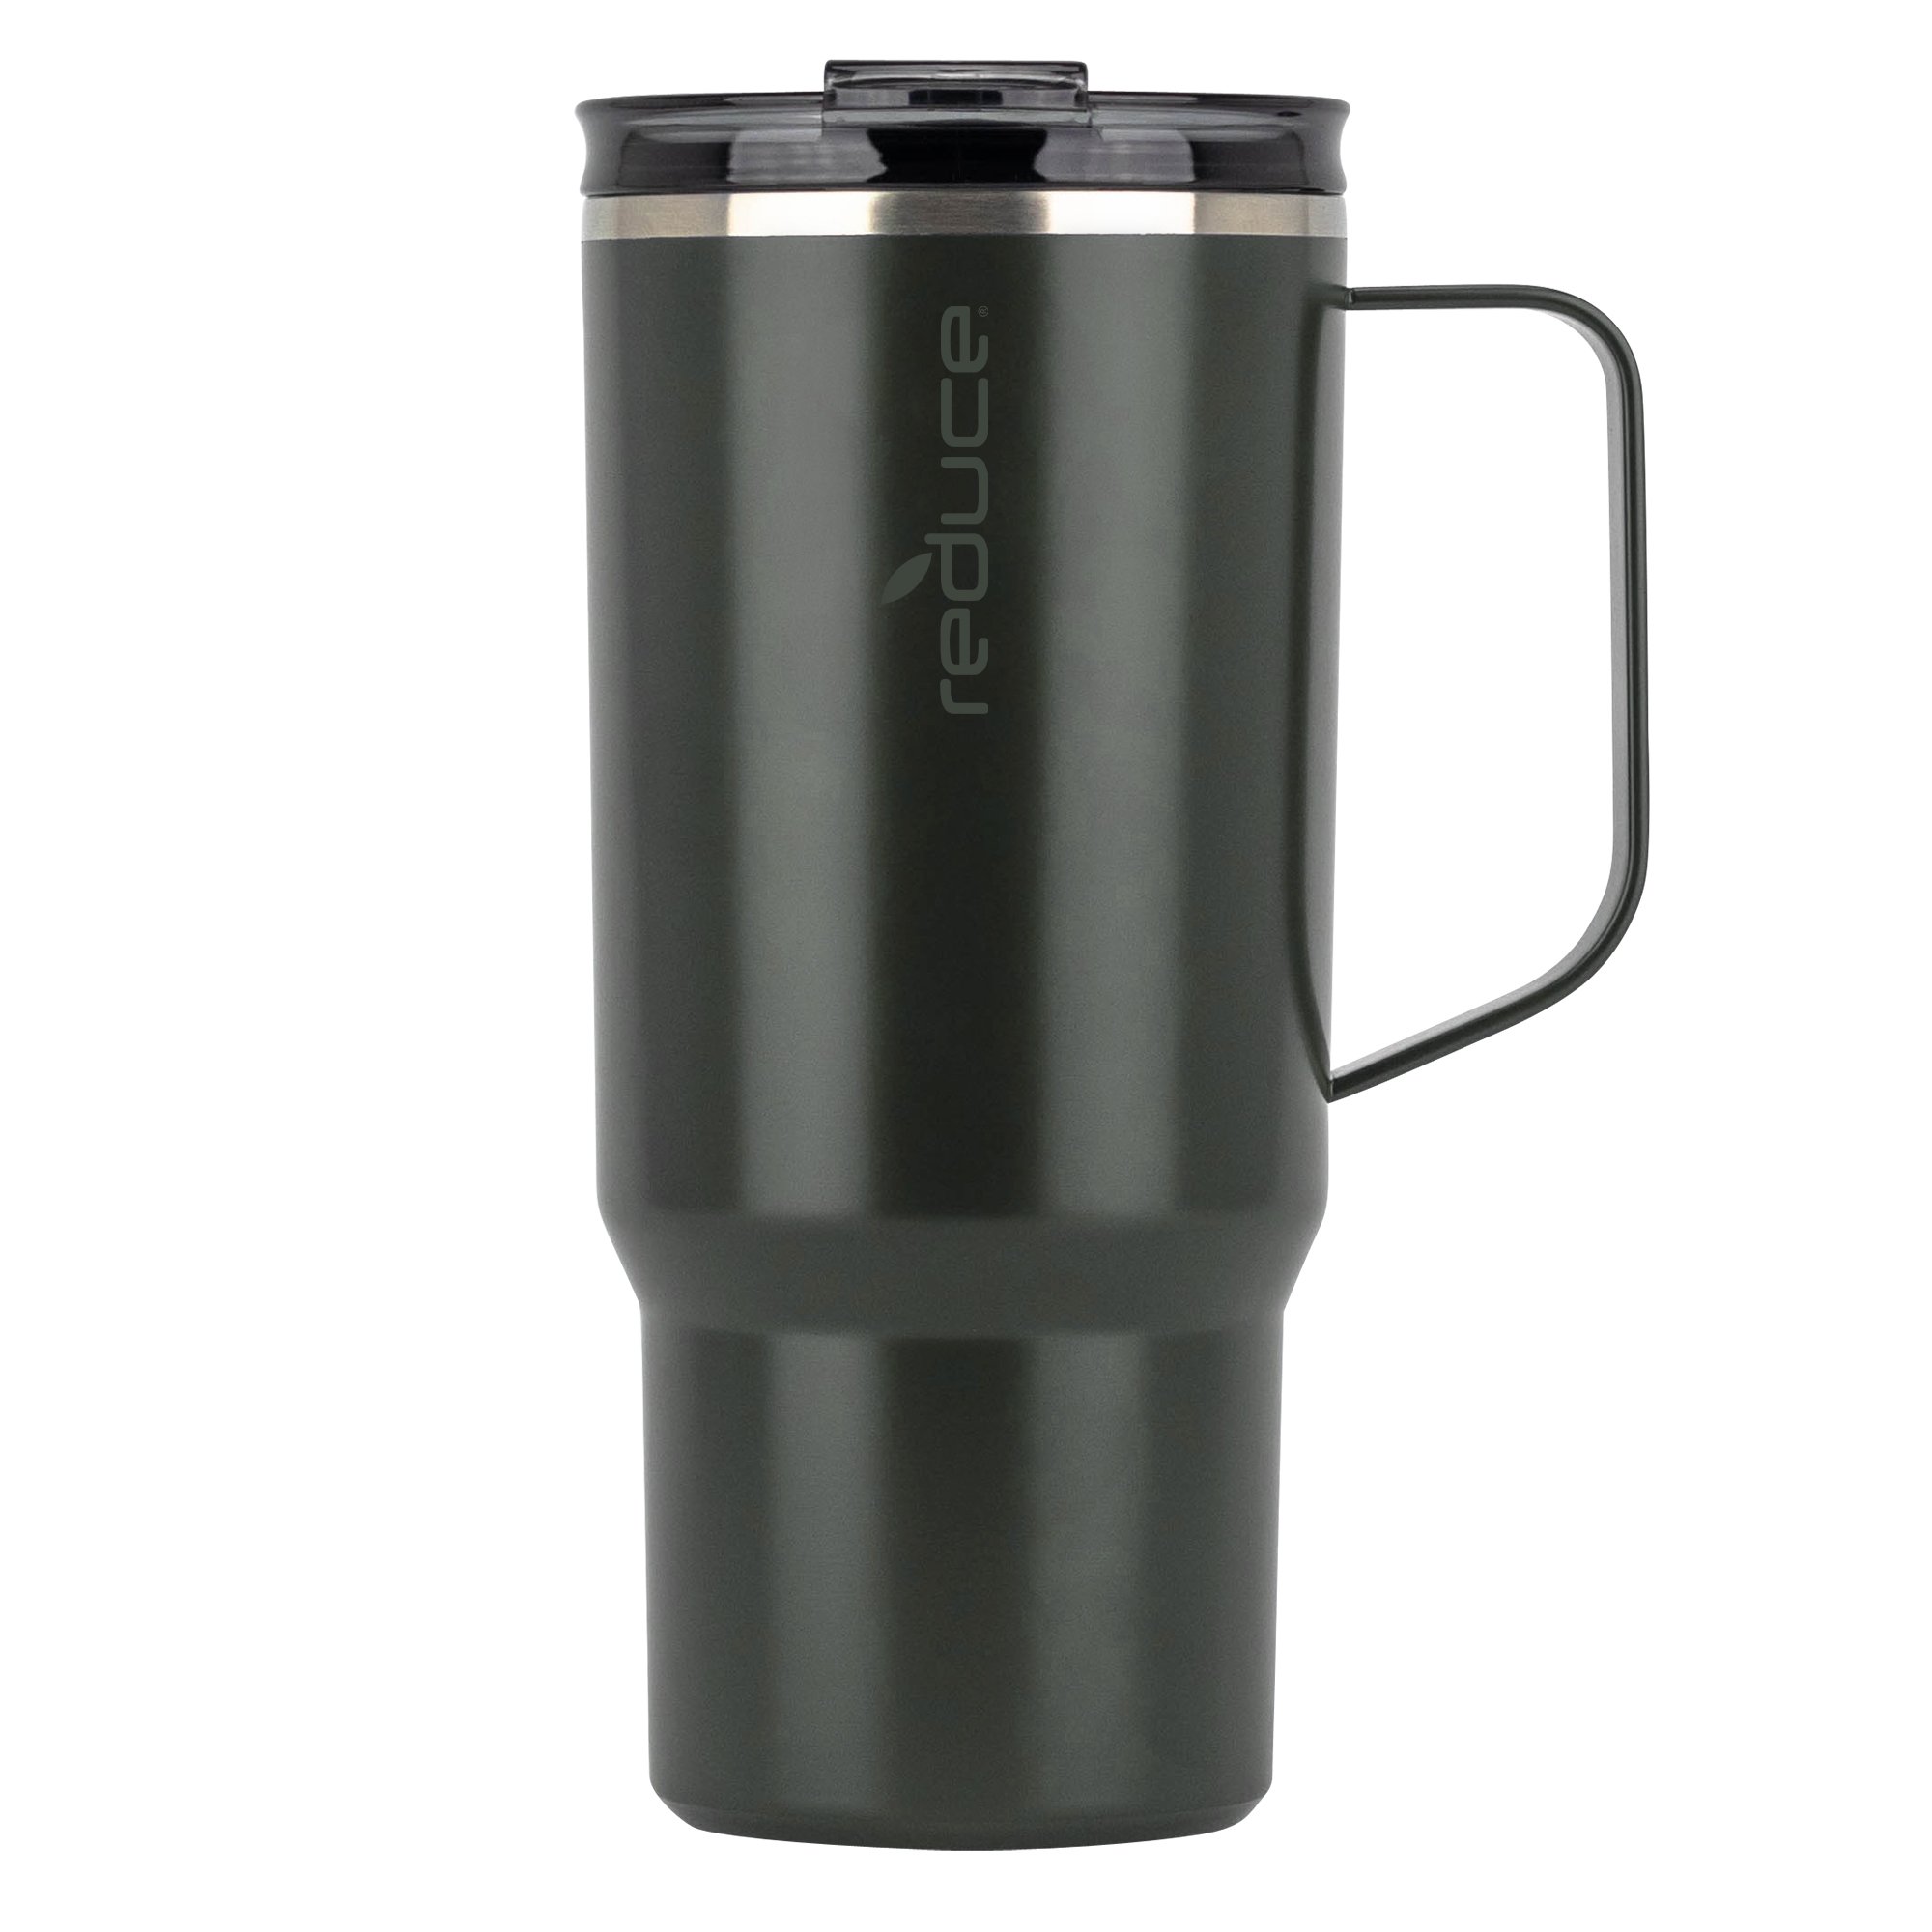 Reduce Stone Stainless Steel Hot1 Travel Mug - Shop Travel & To-Go at H-E-B